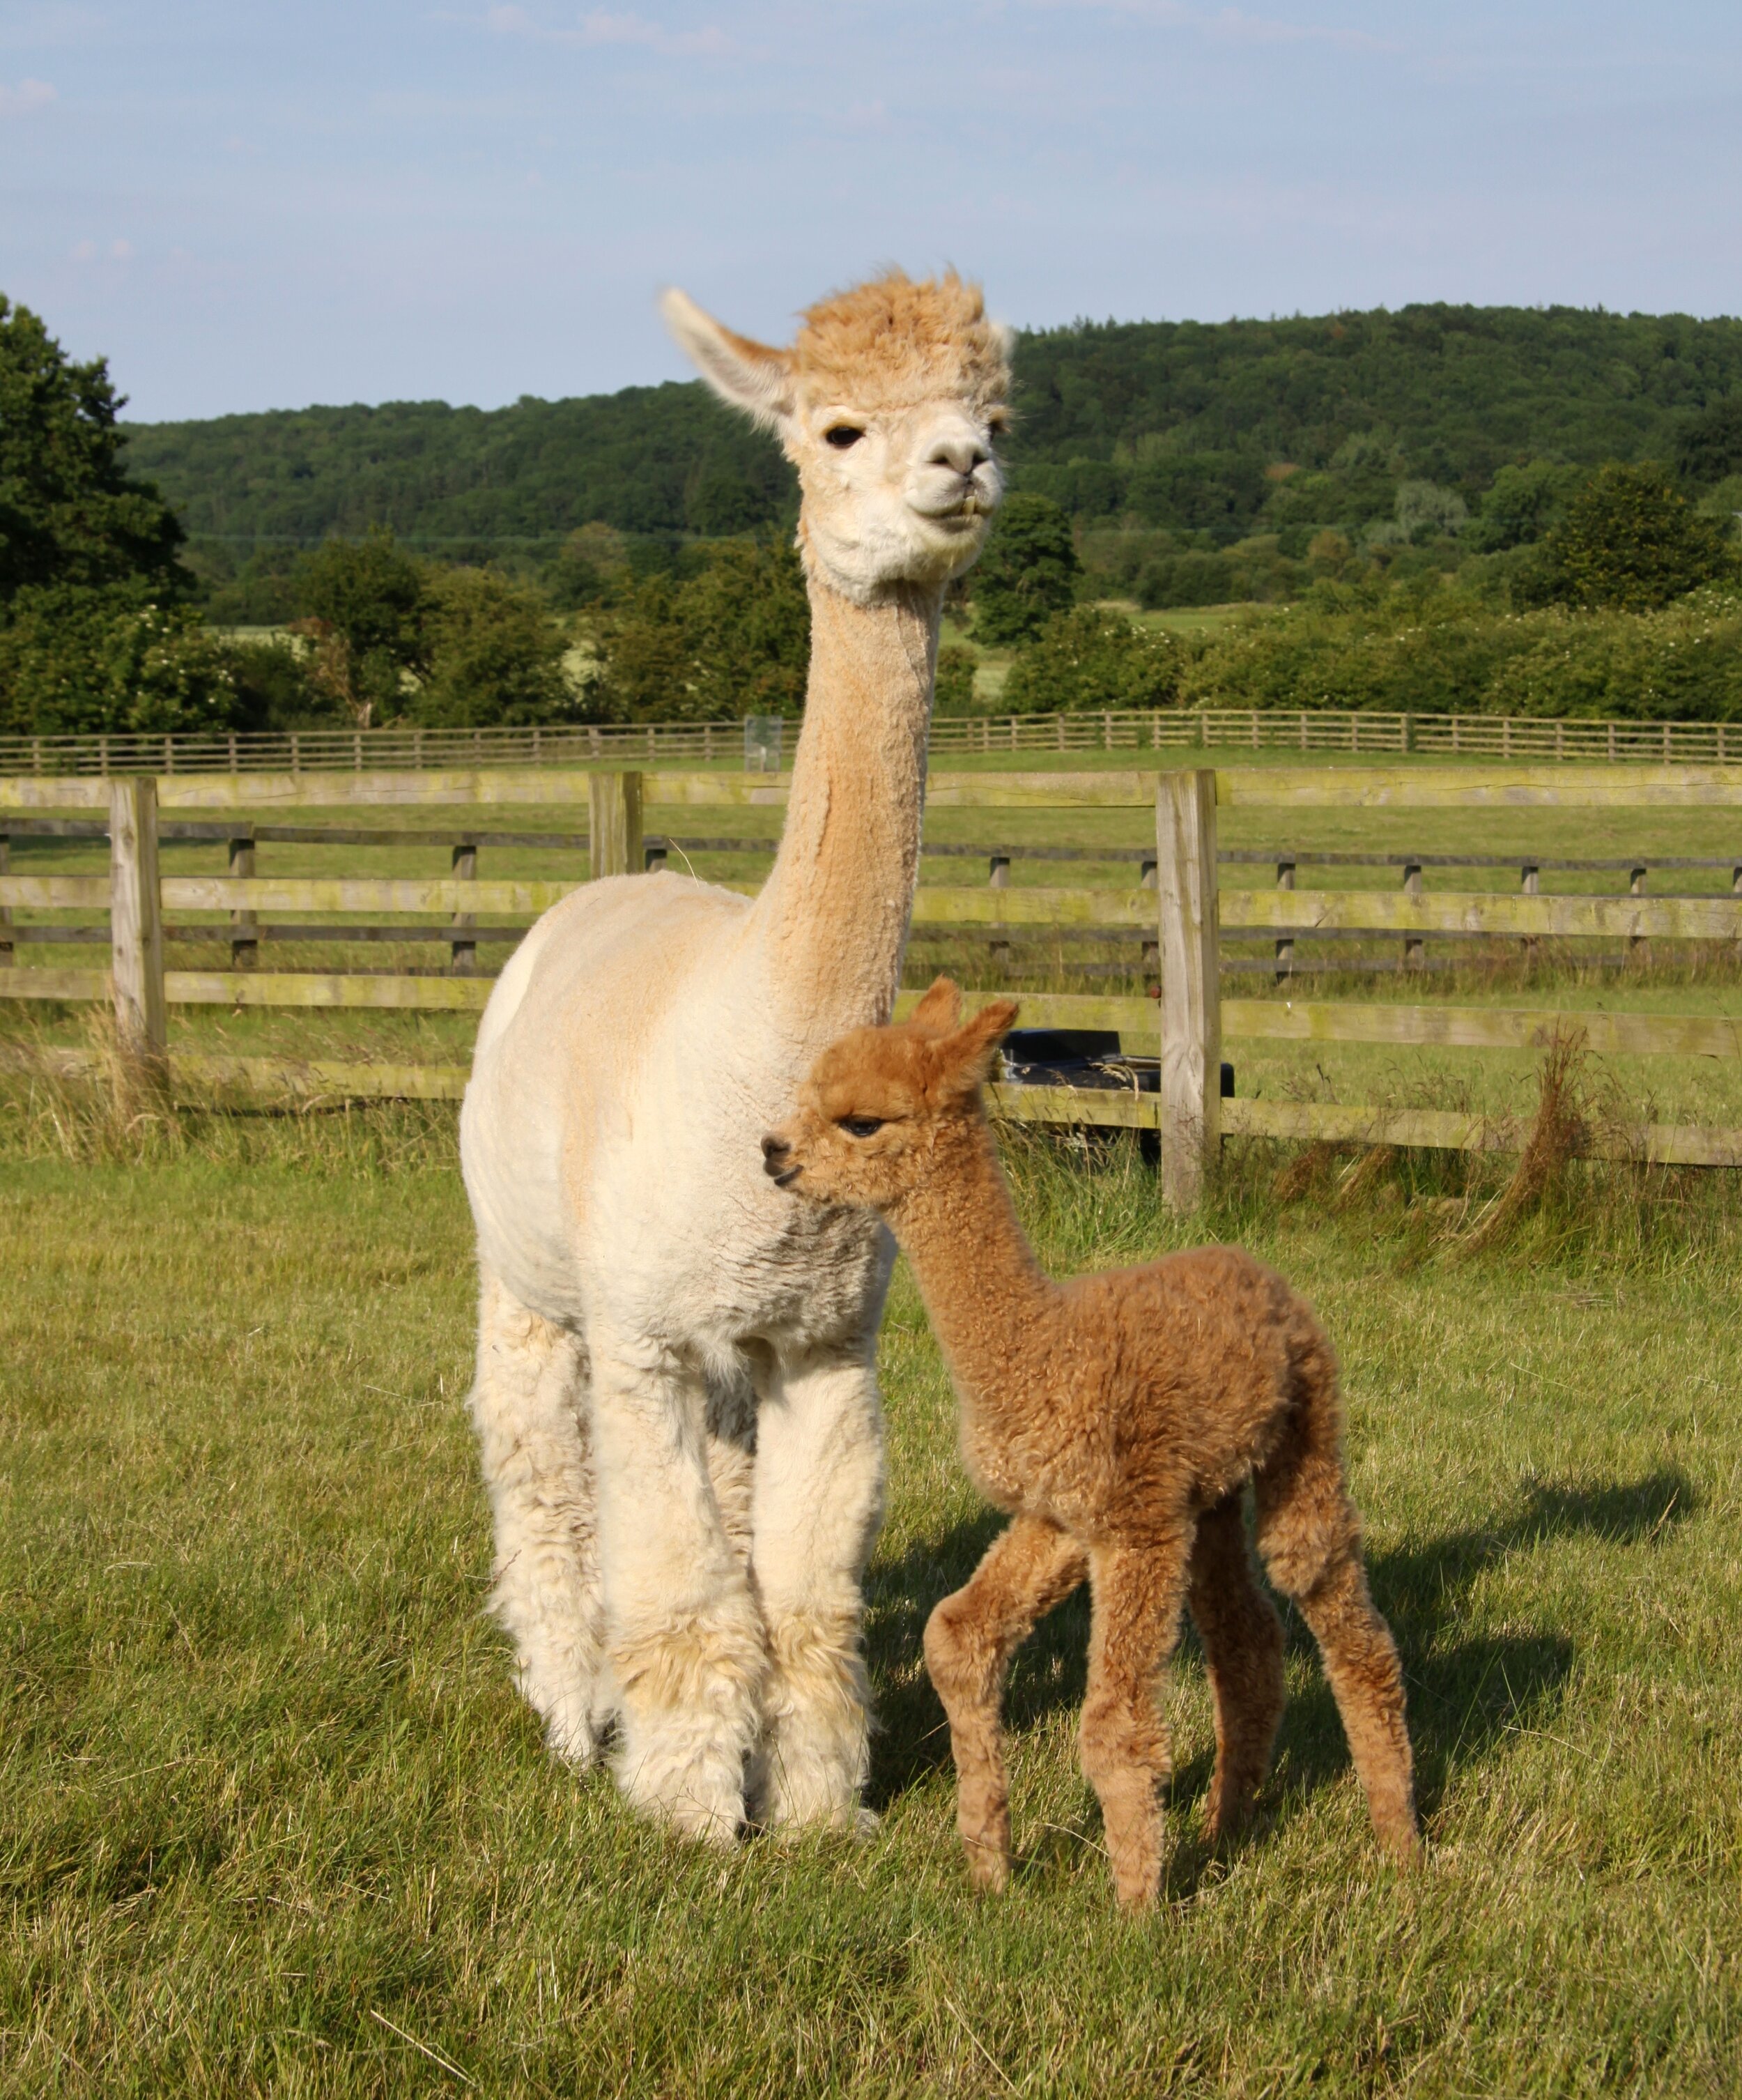 Alpacas on the grounds of 10K Dollar Day's commune - Loophole City!